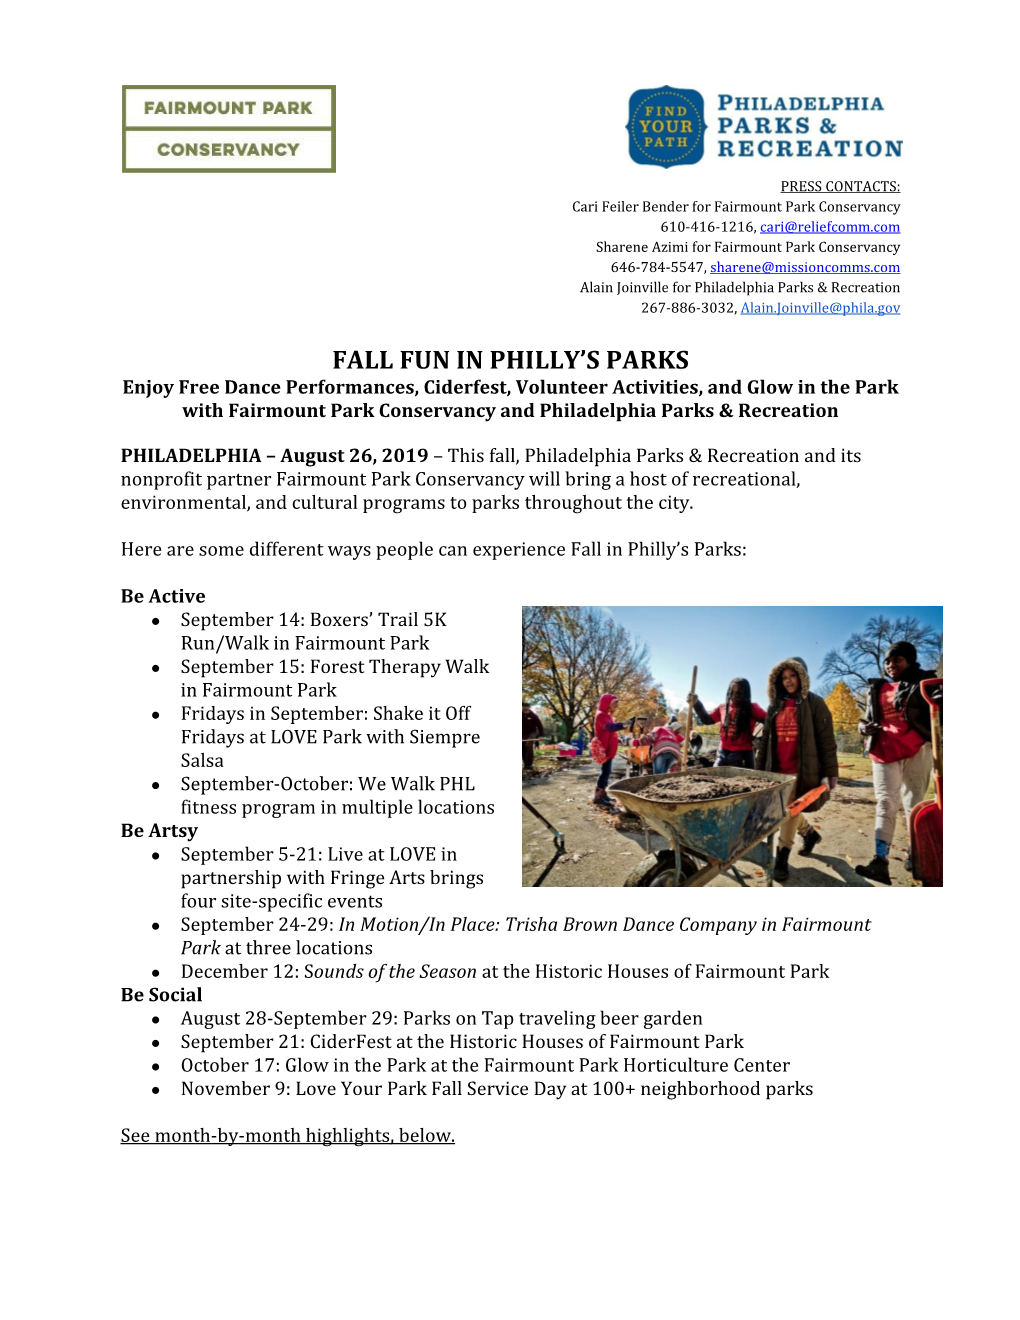 Fall Fun in Philly's Parks